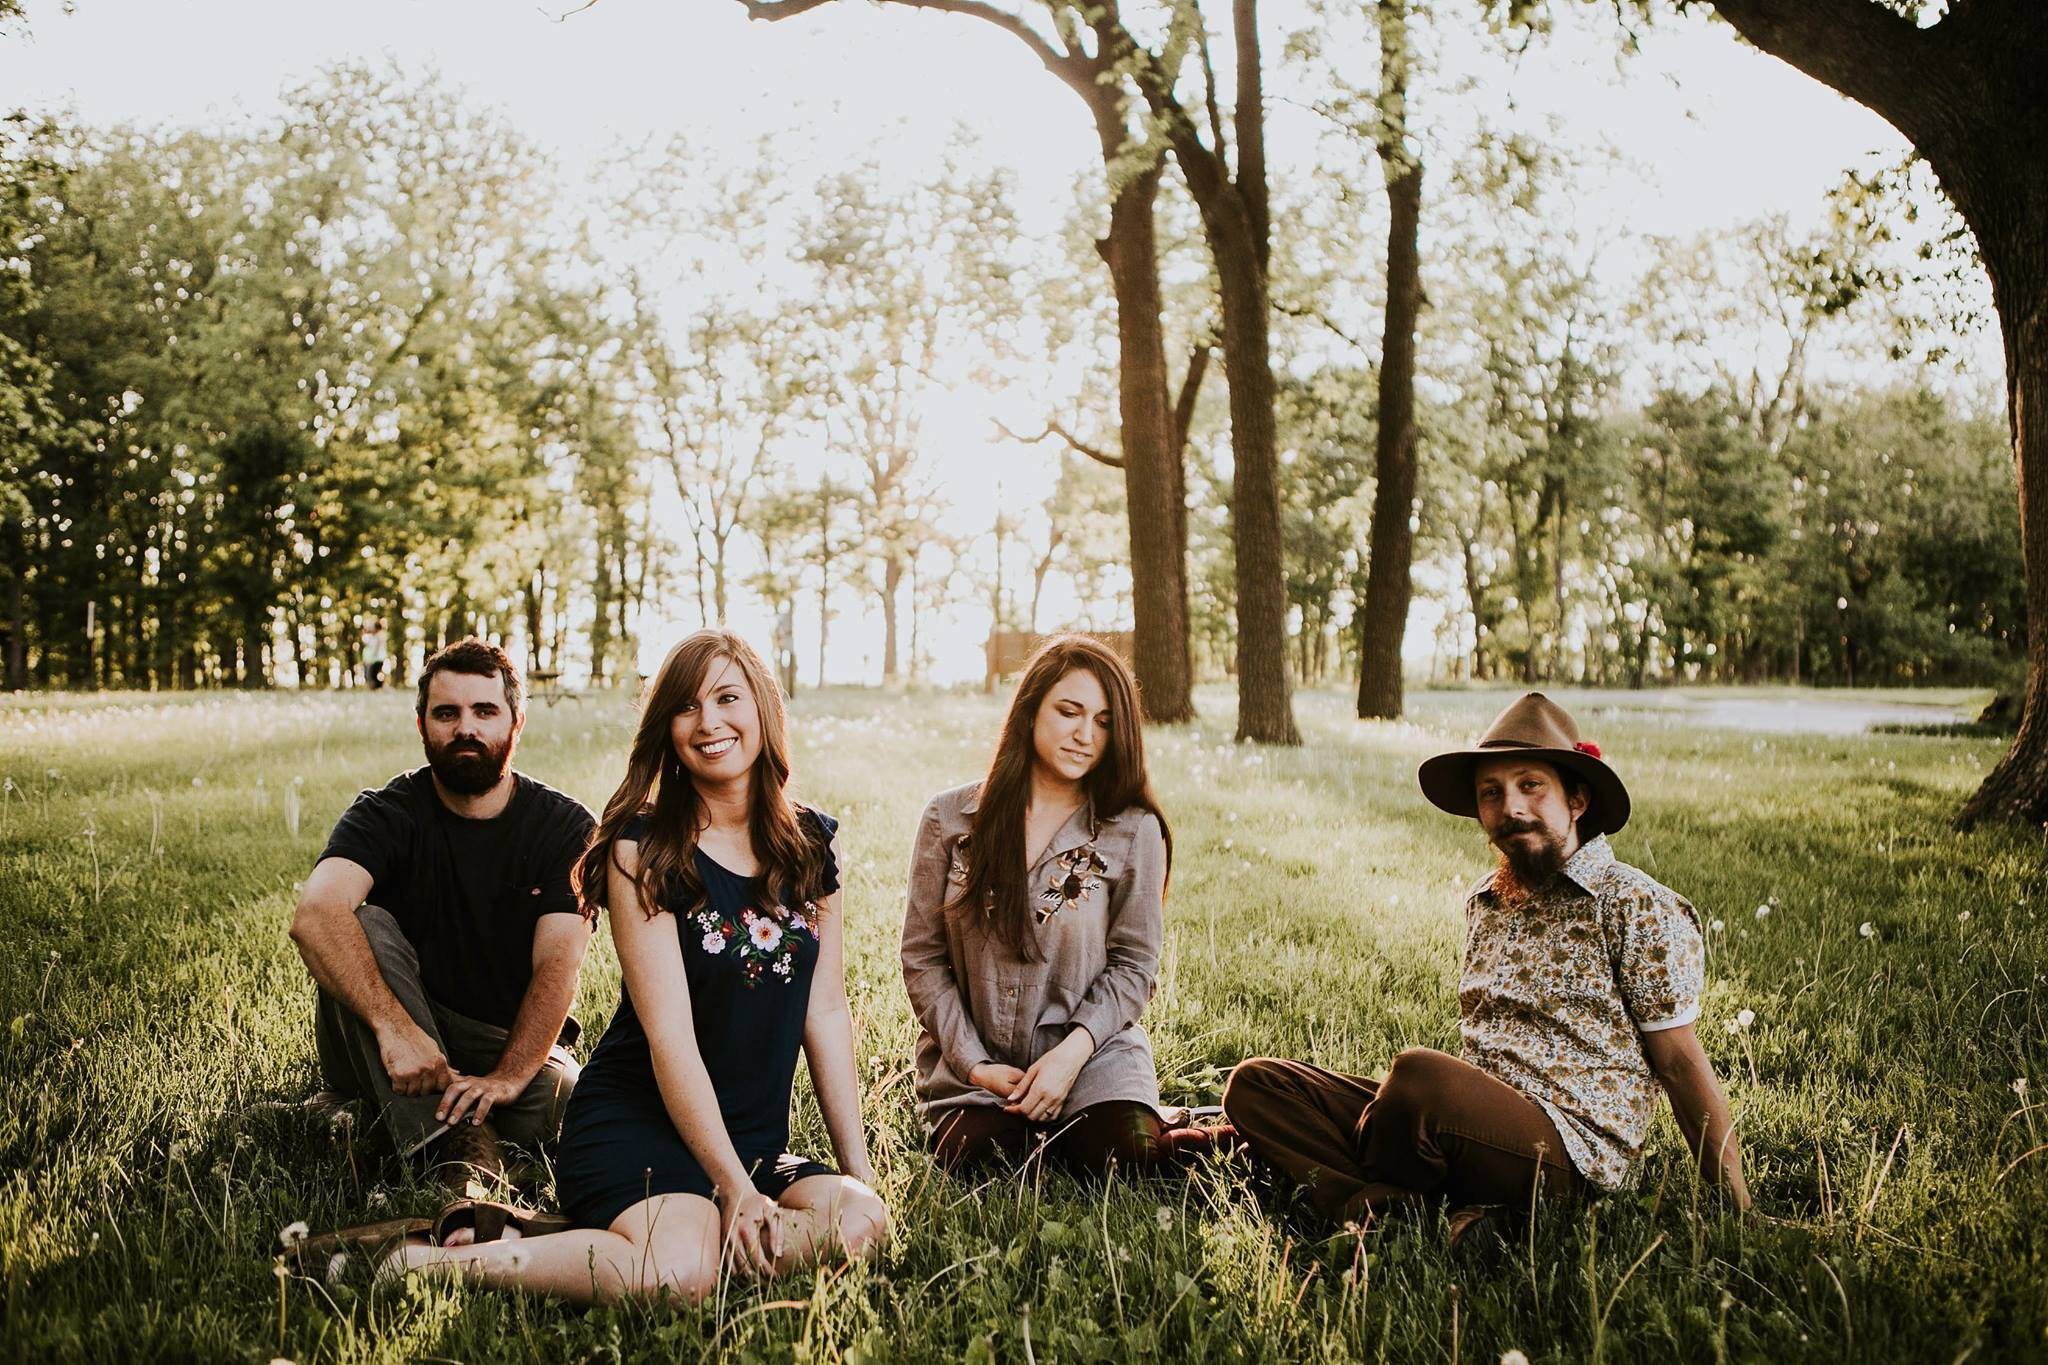 Four people sit in the grass, trees and wooded area behind them. One man sits on the far left, another man sits on the far right wearing a hat. Two women with brown hair sit in the middle. Photo by Anna Longworth. 